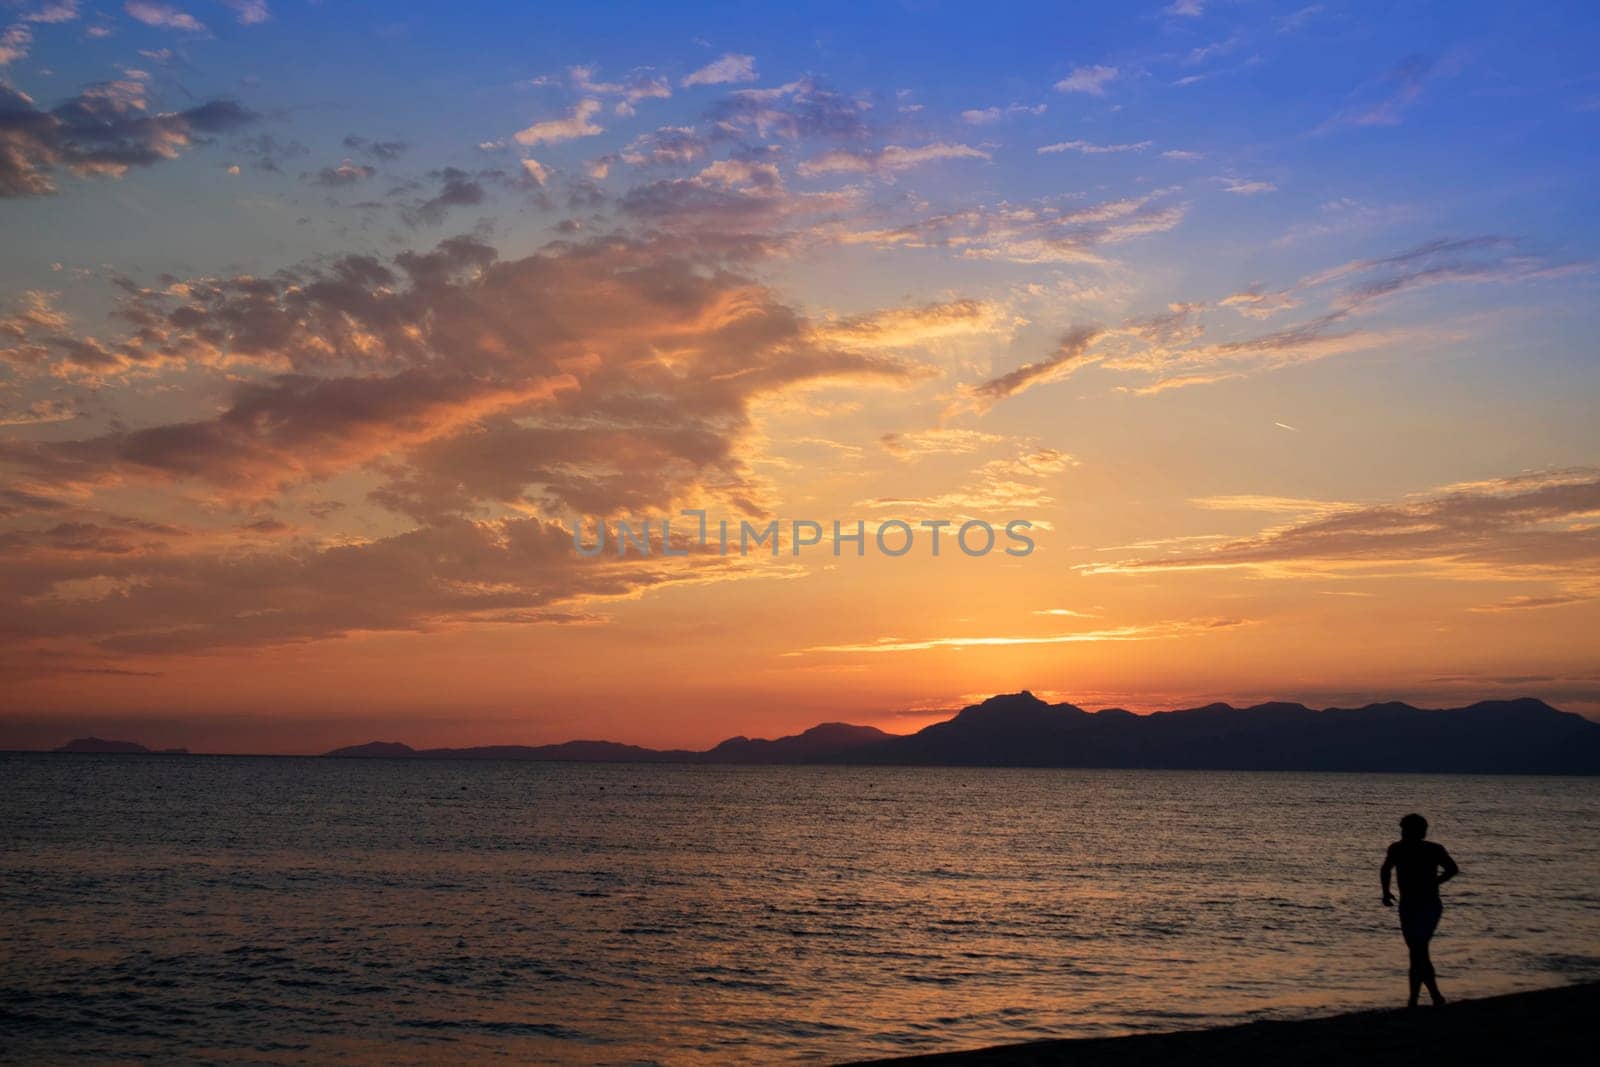 Photographic documentation of a sunset over the sea  by fotografiche.eu